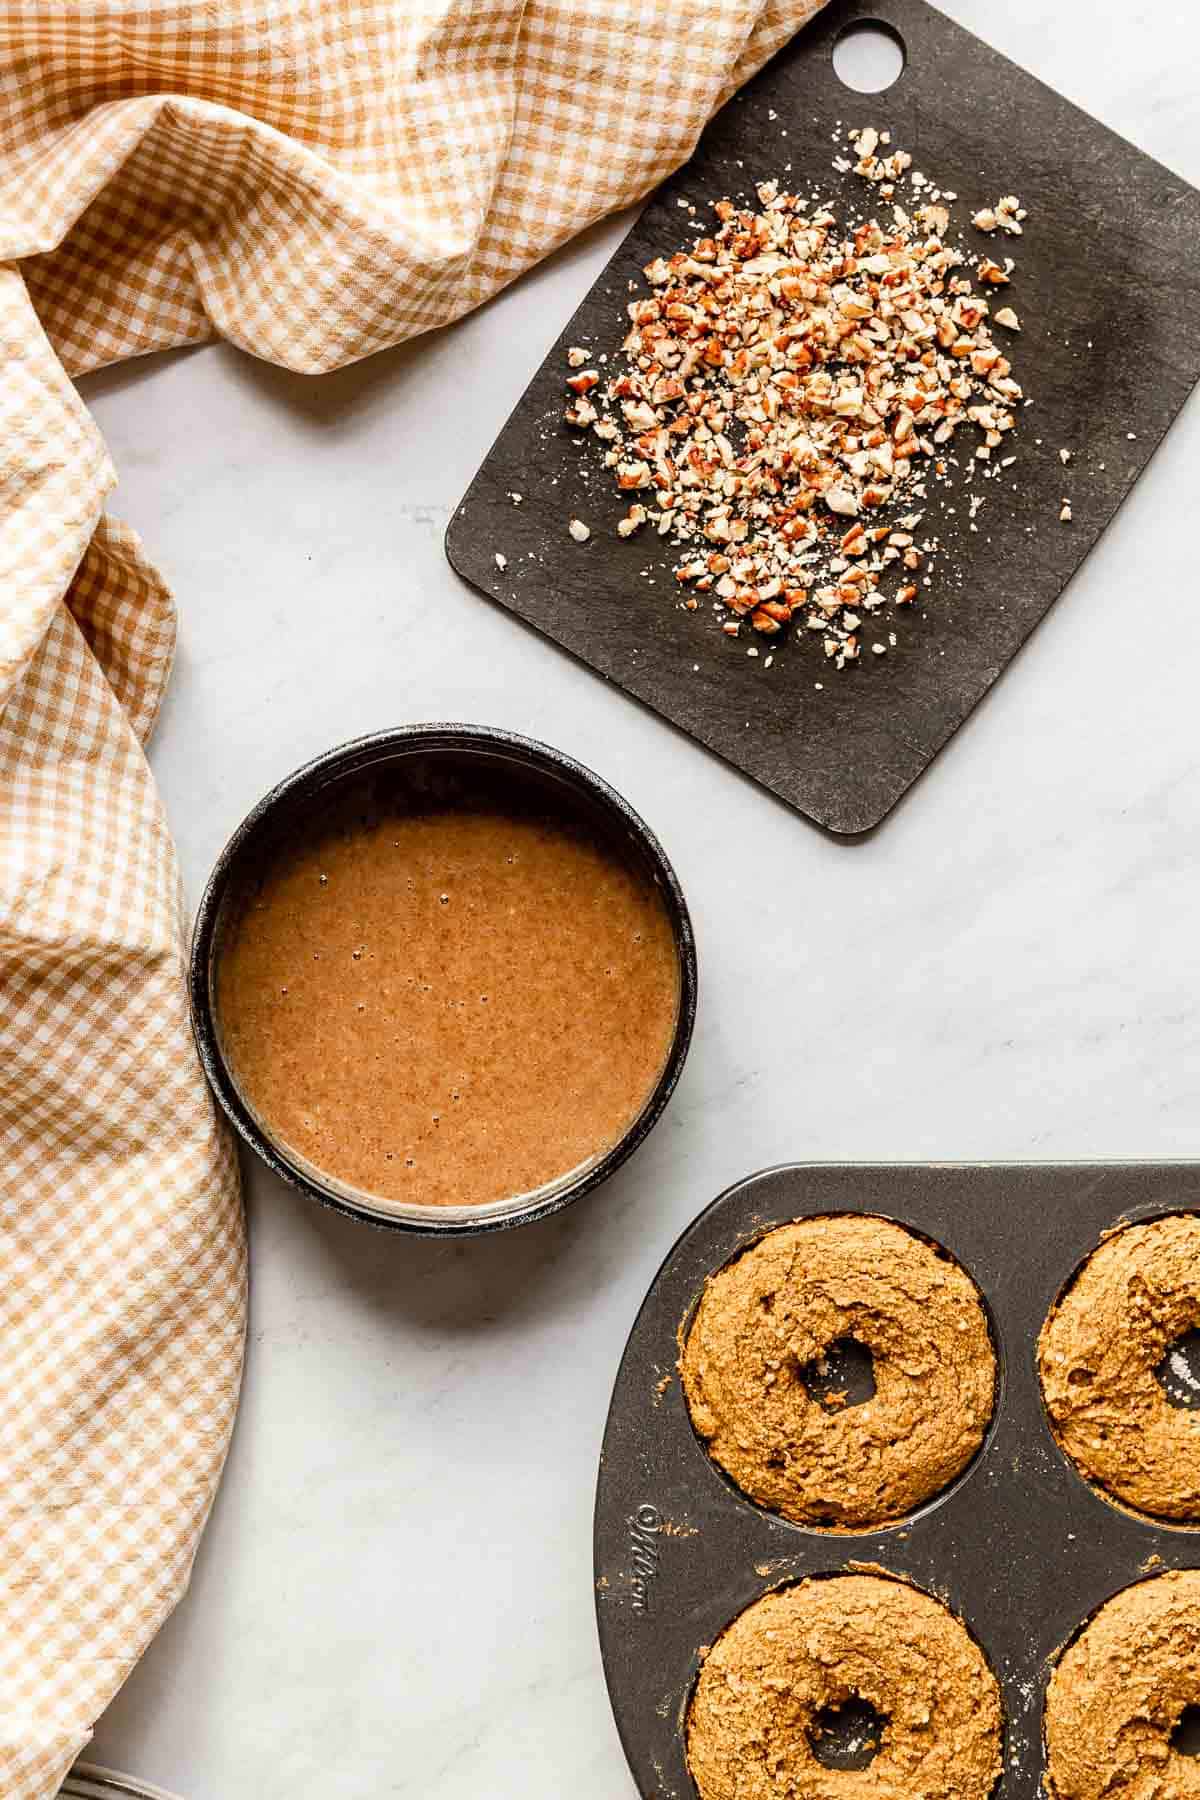 Fresh out of the oven baked pumpkin donuts in a donut pan next to a bowl of pecan caramel sauce and a small black cutting board filled with chopped pecans.